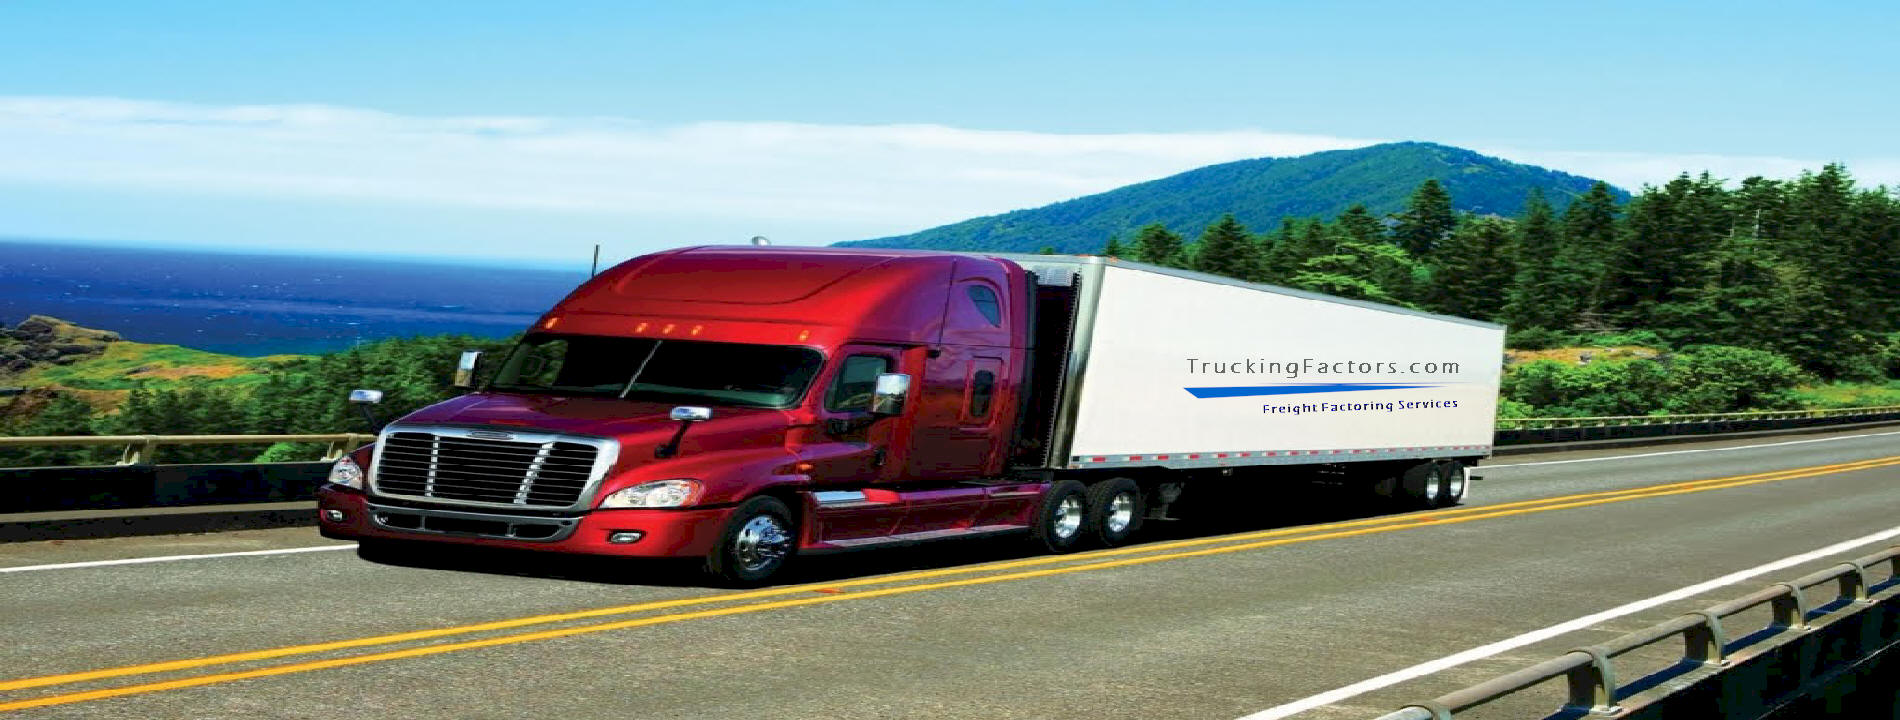 trucking factors - freight factoring for trucking companies